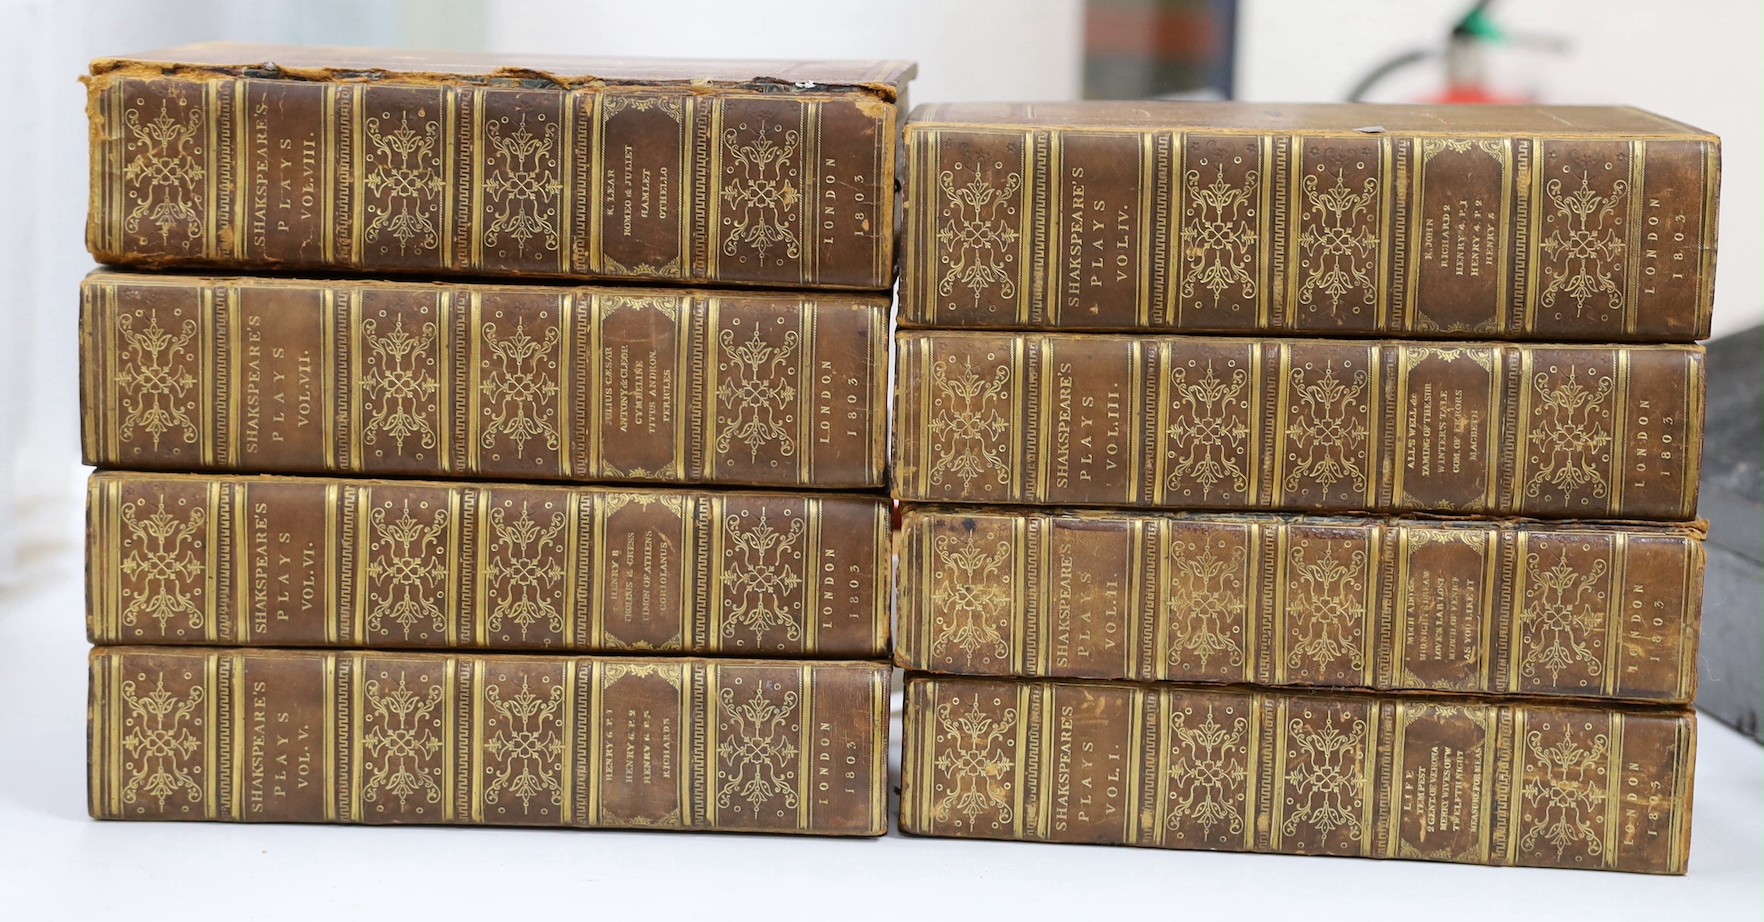 Shakespeare's plays, pub. 1803, eight leather-bound volumes, printed by T. Bensley for Wynne and Scholey, and J. Wallis